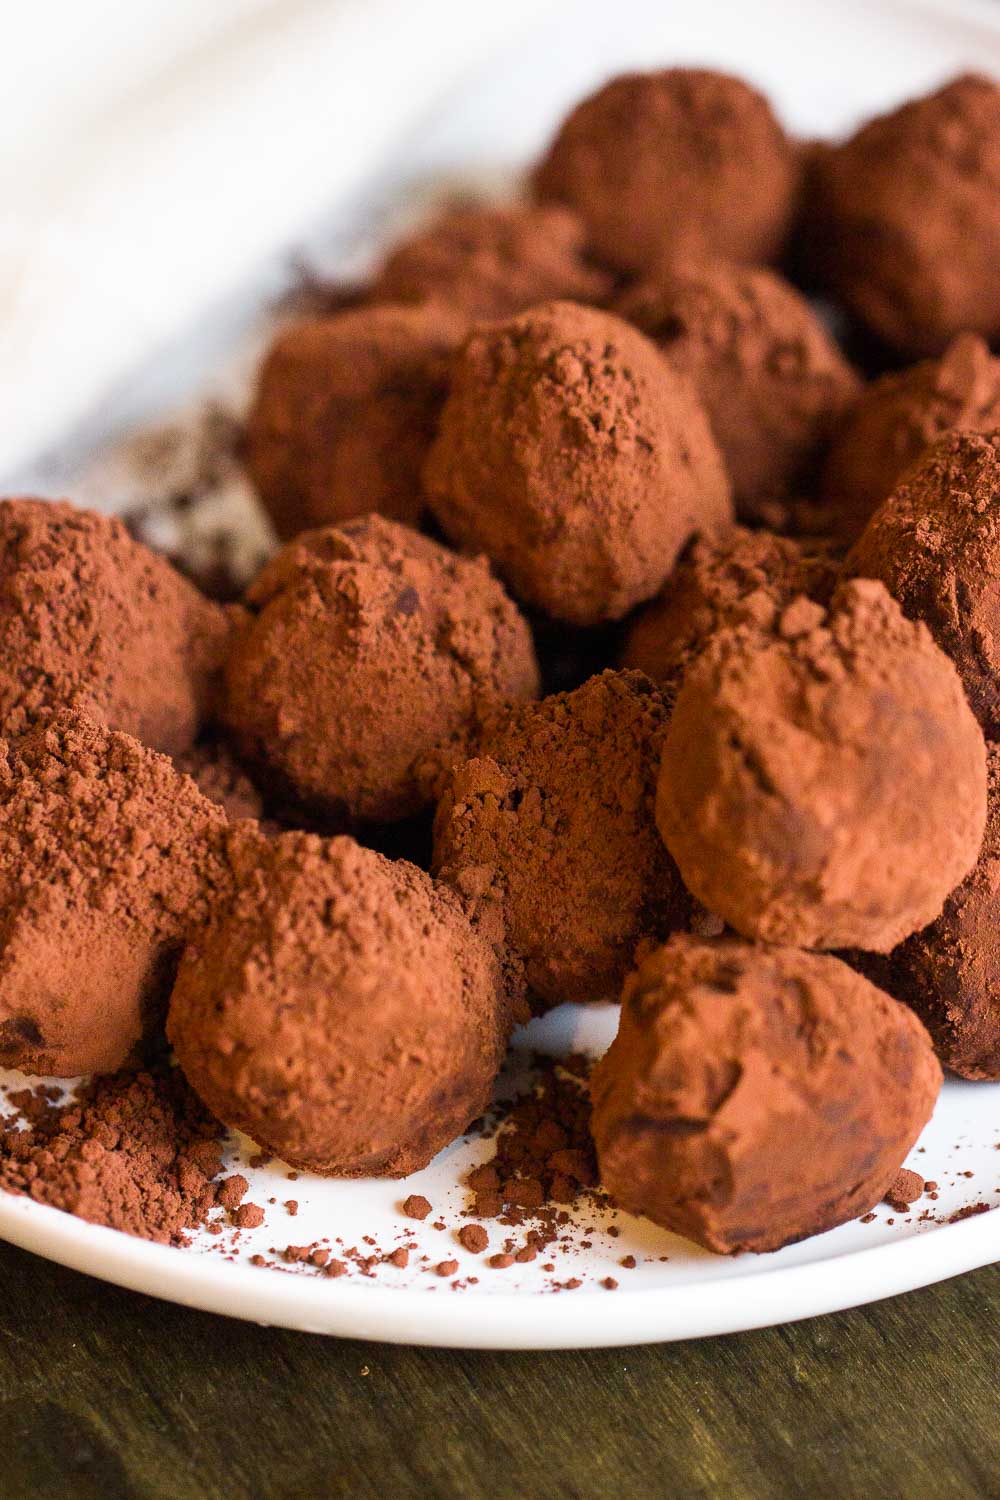 Chocolate Avocado Truffles make for a keto-friendly treat that is worth sharing! Guilt-free and packed with incredible flavors, these are the ultimate indulgence that won't destroy your diet.